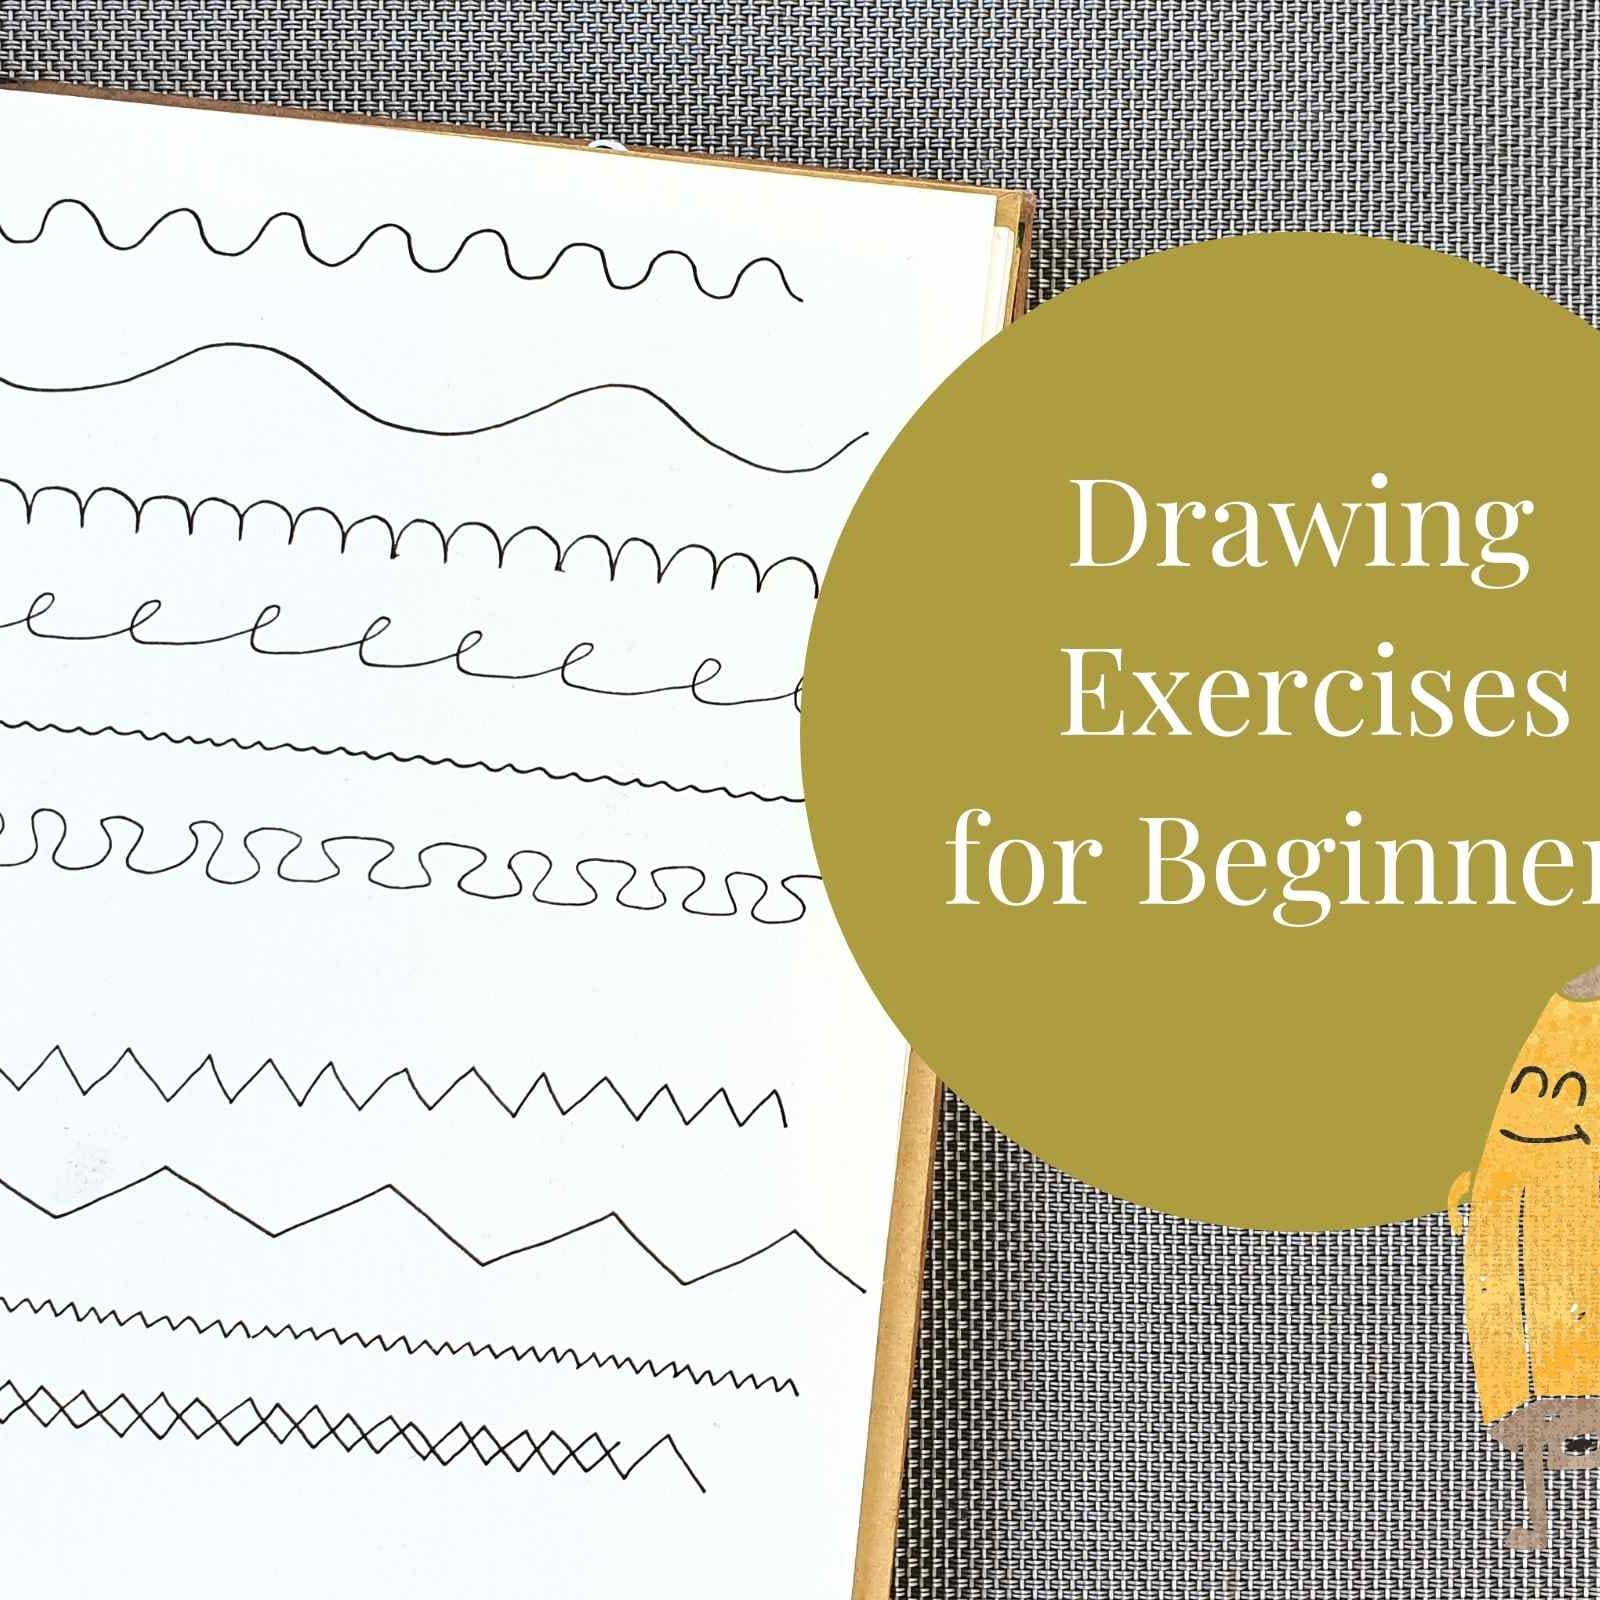 6 Easy Drawing Exercises for Beginners: Including Drawing Tablet Practice